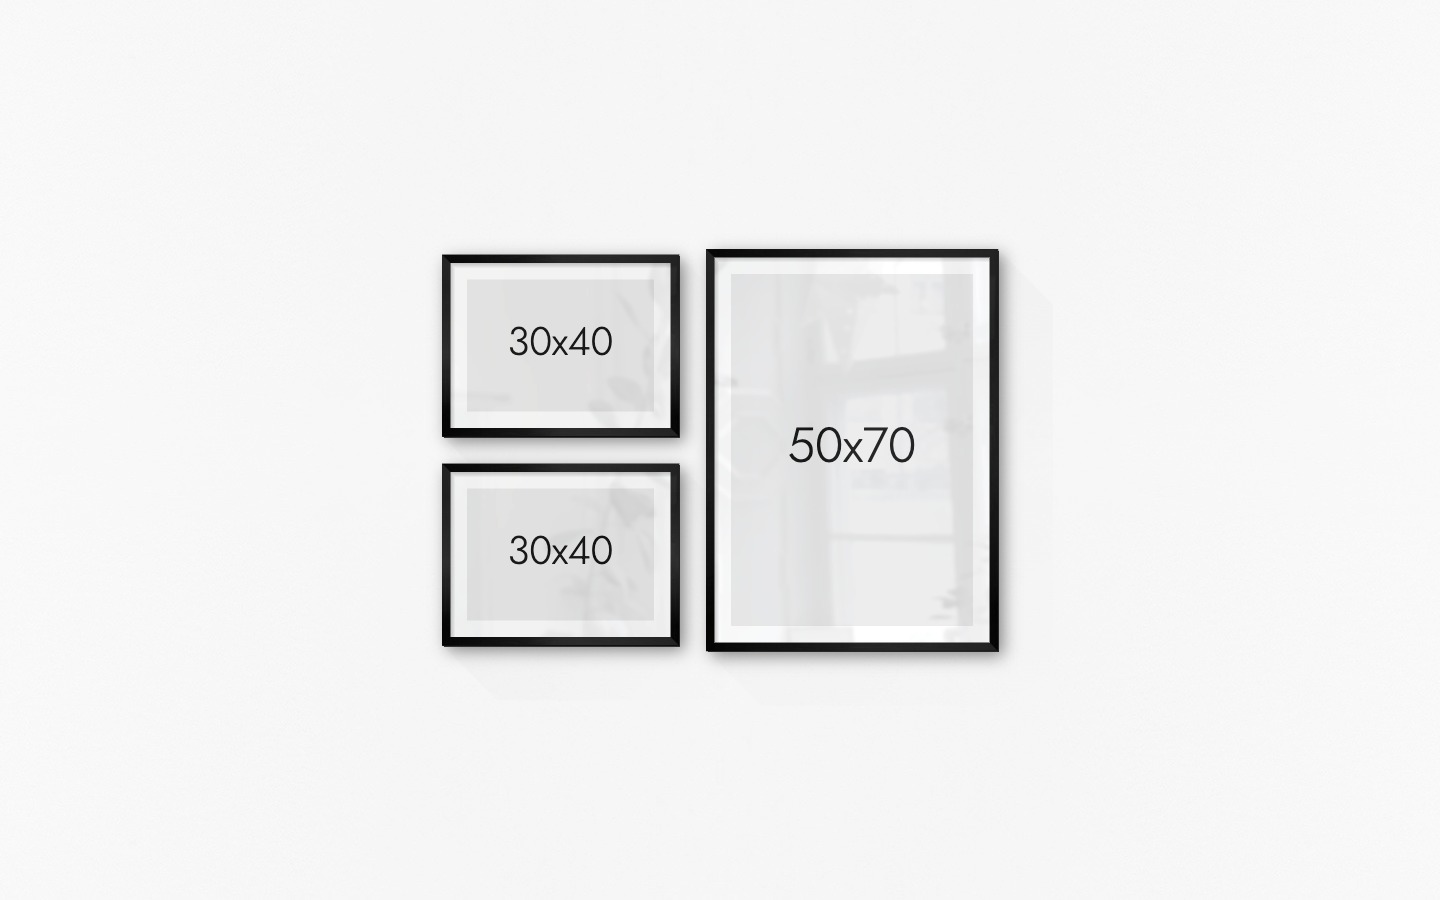 Gallery wall with picture frames in black in sizes 30x40 and 50x70